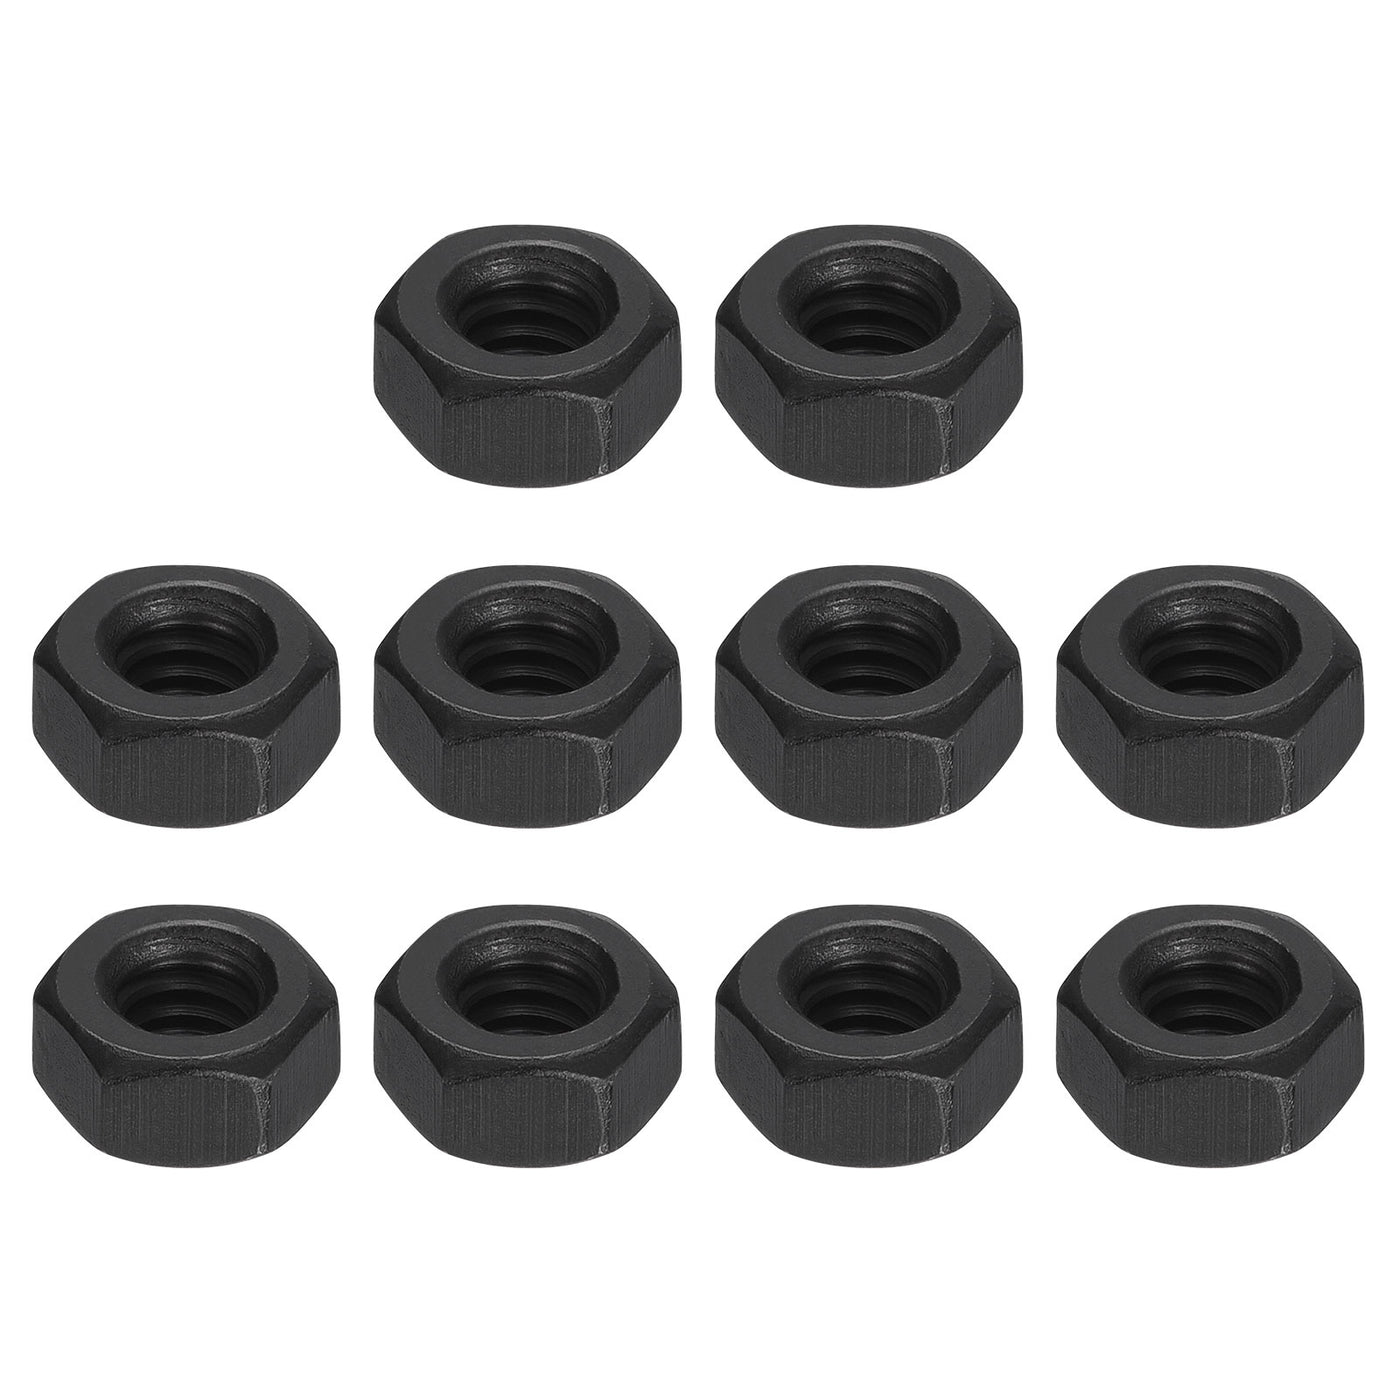 uxcell Uxcell Hex Nuts, Carbon Steel Black Oxide Hexagon Nut for Screw Bolt